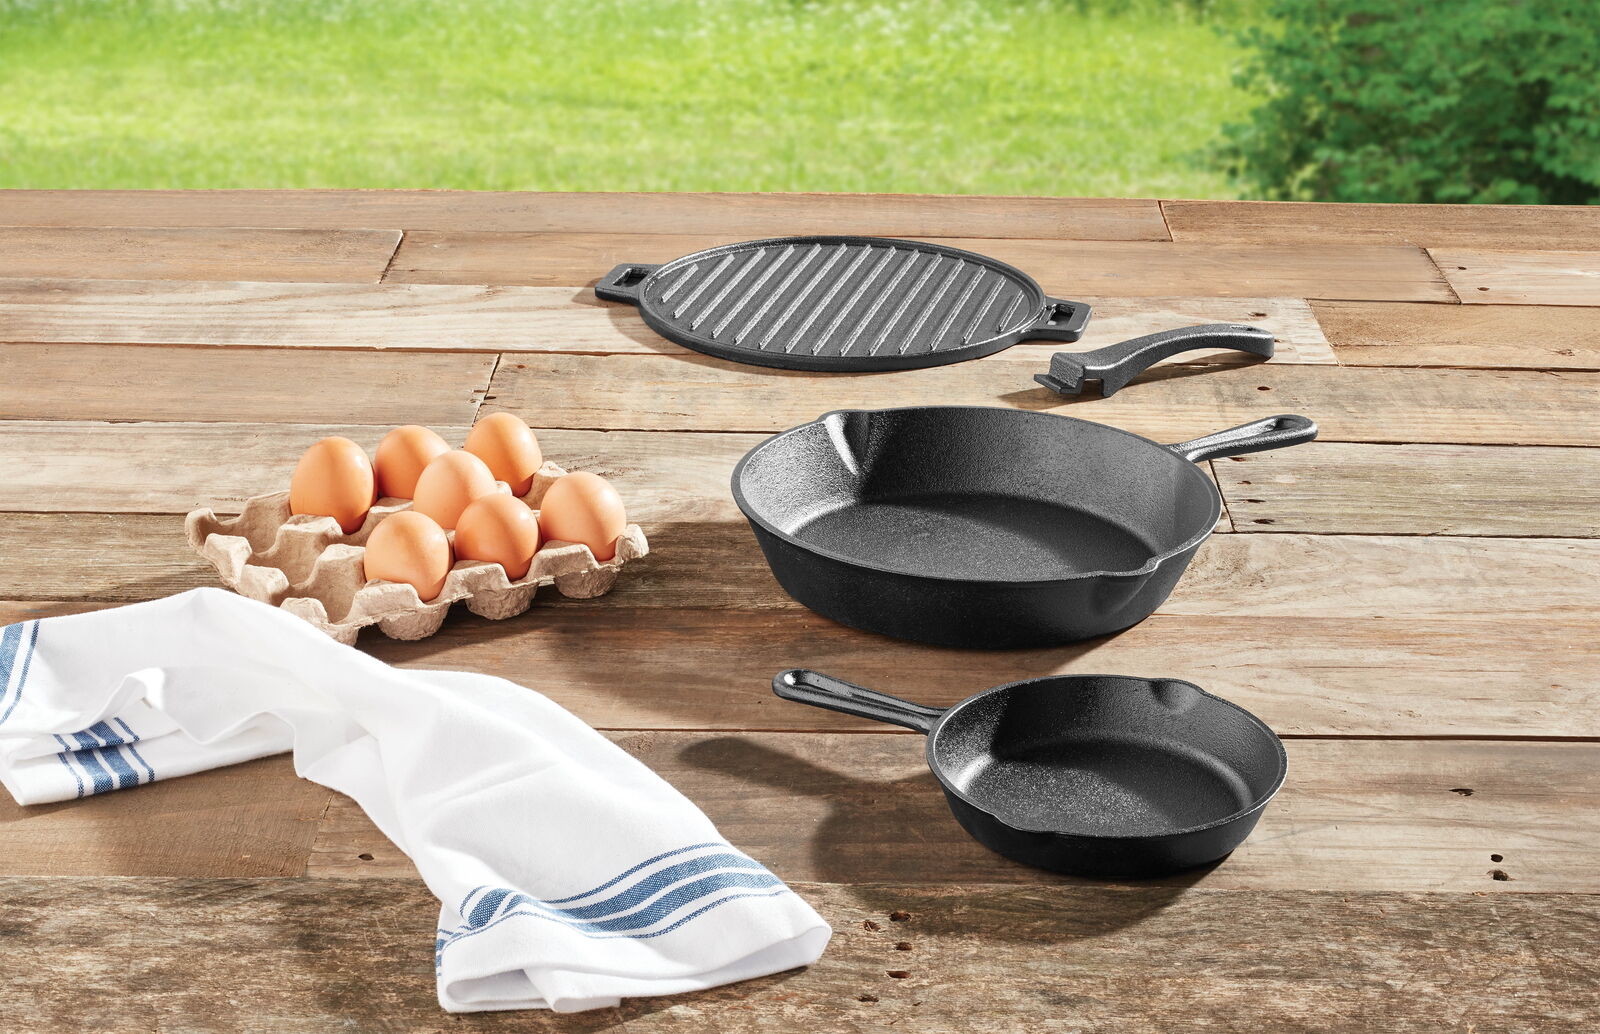 4-Piece Cast Iron Skillet Set with Handles and Griddle, Pre-Seasoned